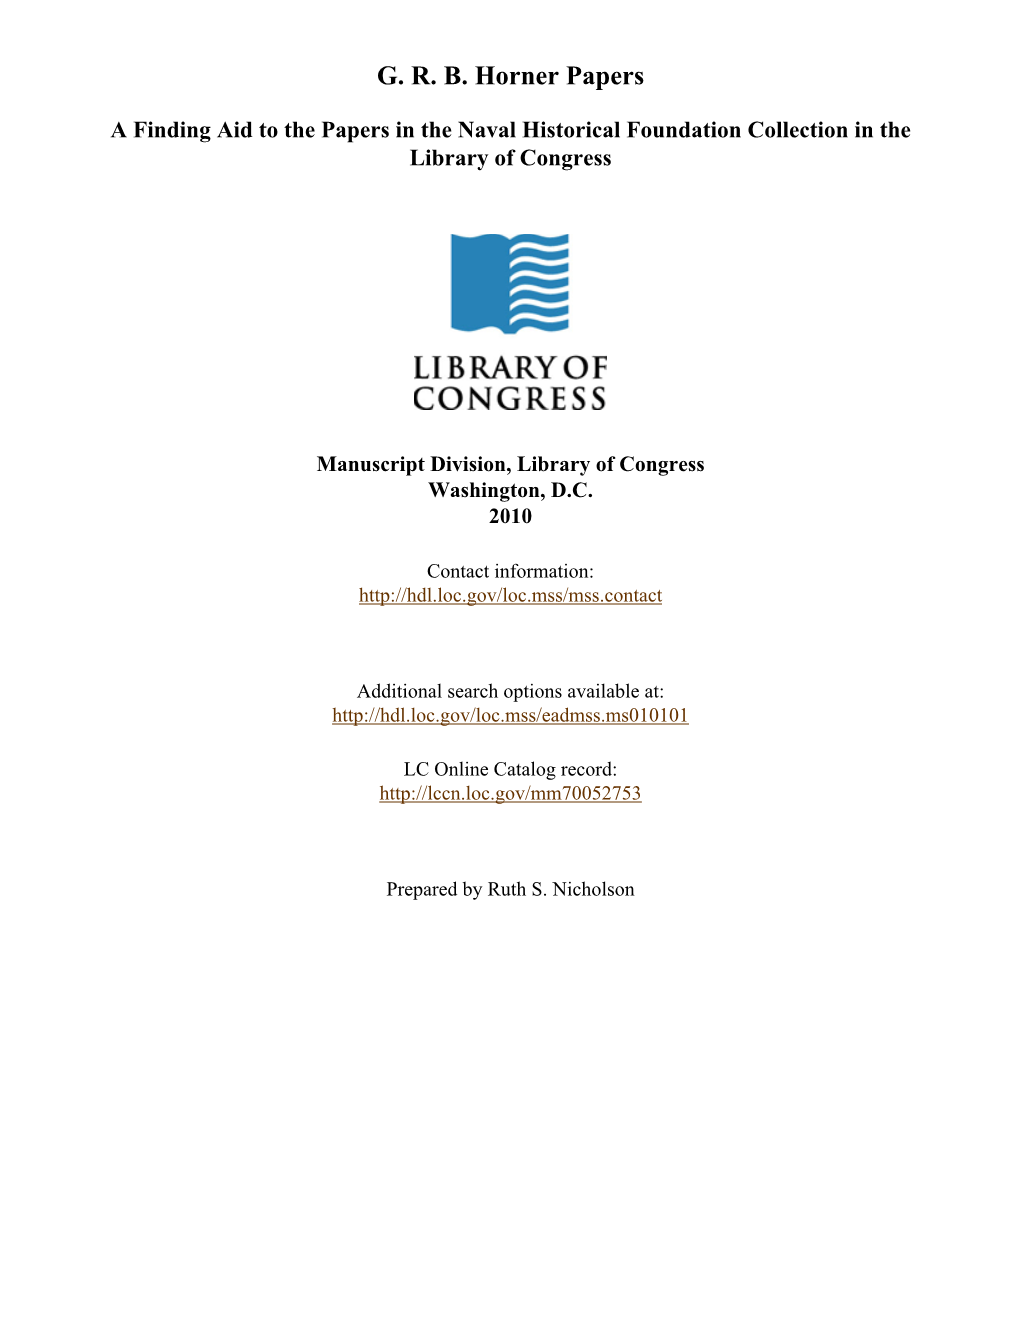 G. R. B. Horner Papers [Finding Aid]. Library of Congress. [PDF Rendered